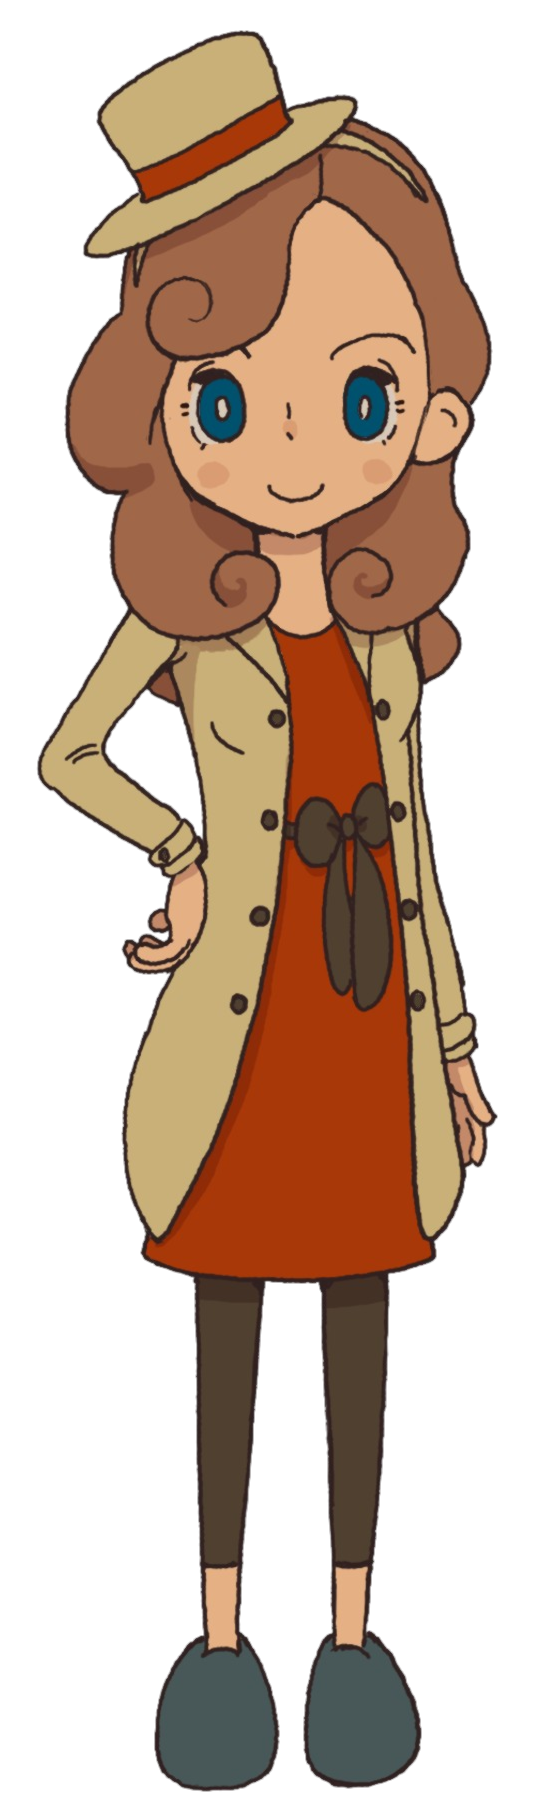 Katrielle layton professor wiki. Detective clipart mystery solved